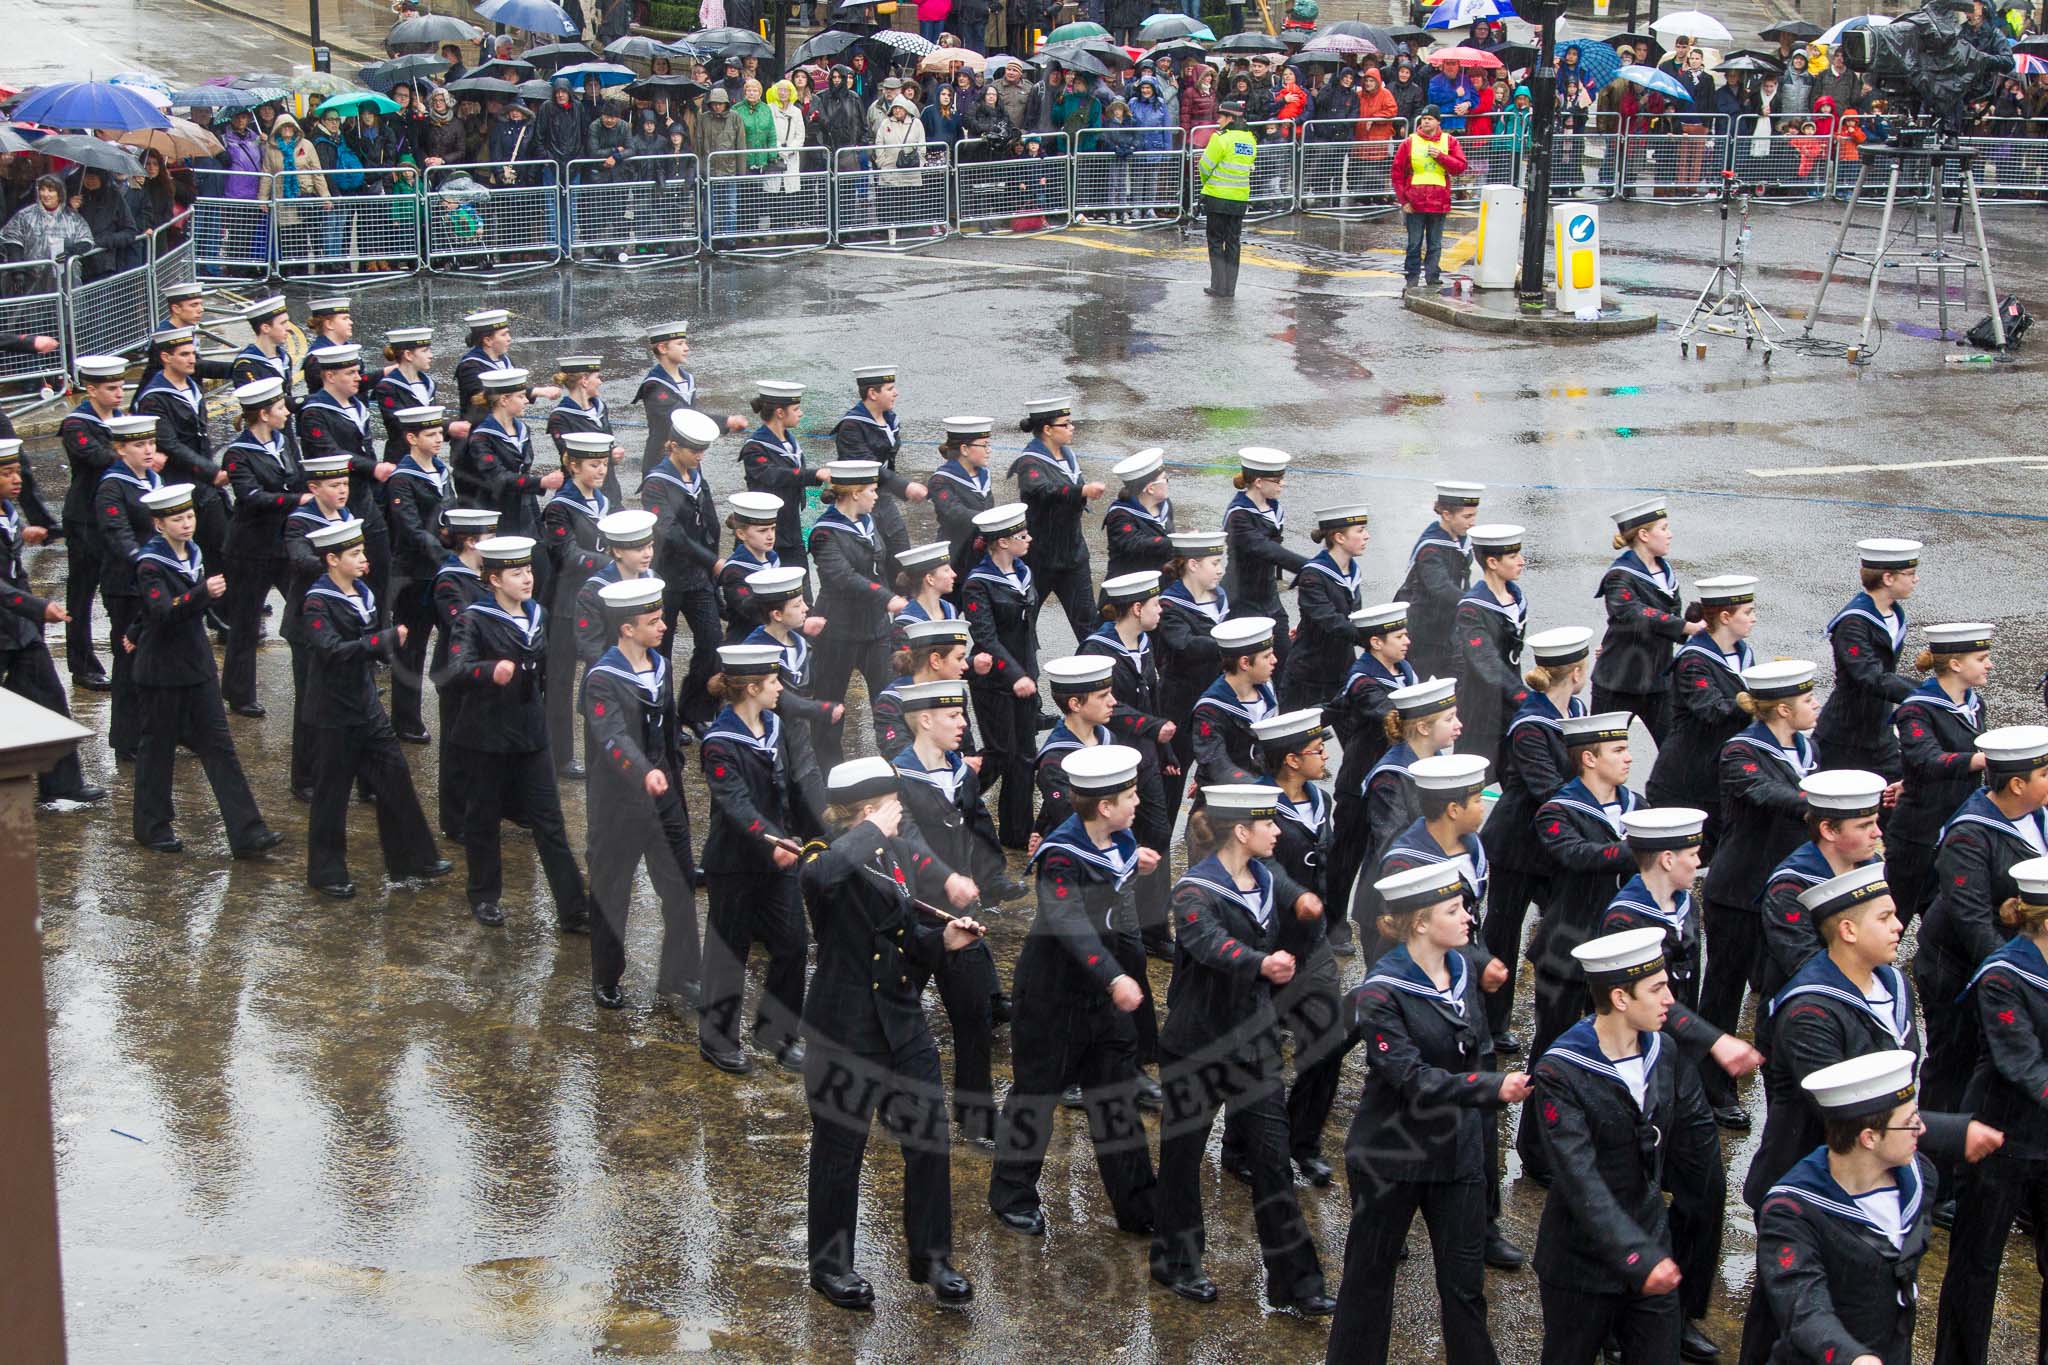 Lord Mayor's Show 2013: 101-London Area Sea Cadet Band-more than 100 Sea Cadets from 16 units across London are taking part in the parade this year..
Press stand opposite Mansion House, City of London,
London,
Greater London,
United Kingdom,
on 09 November 2013 at 11:54, image #1203